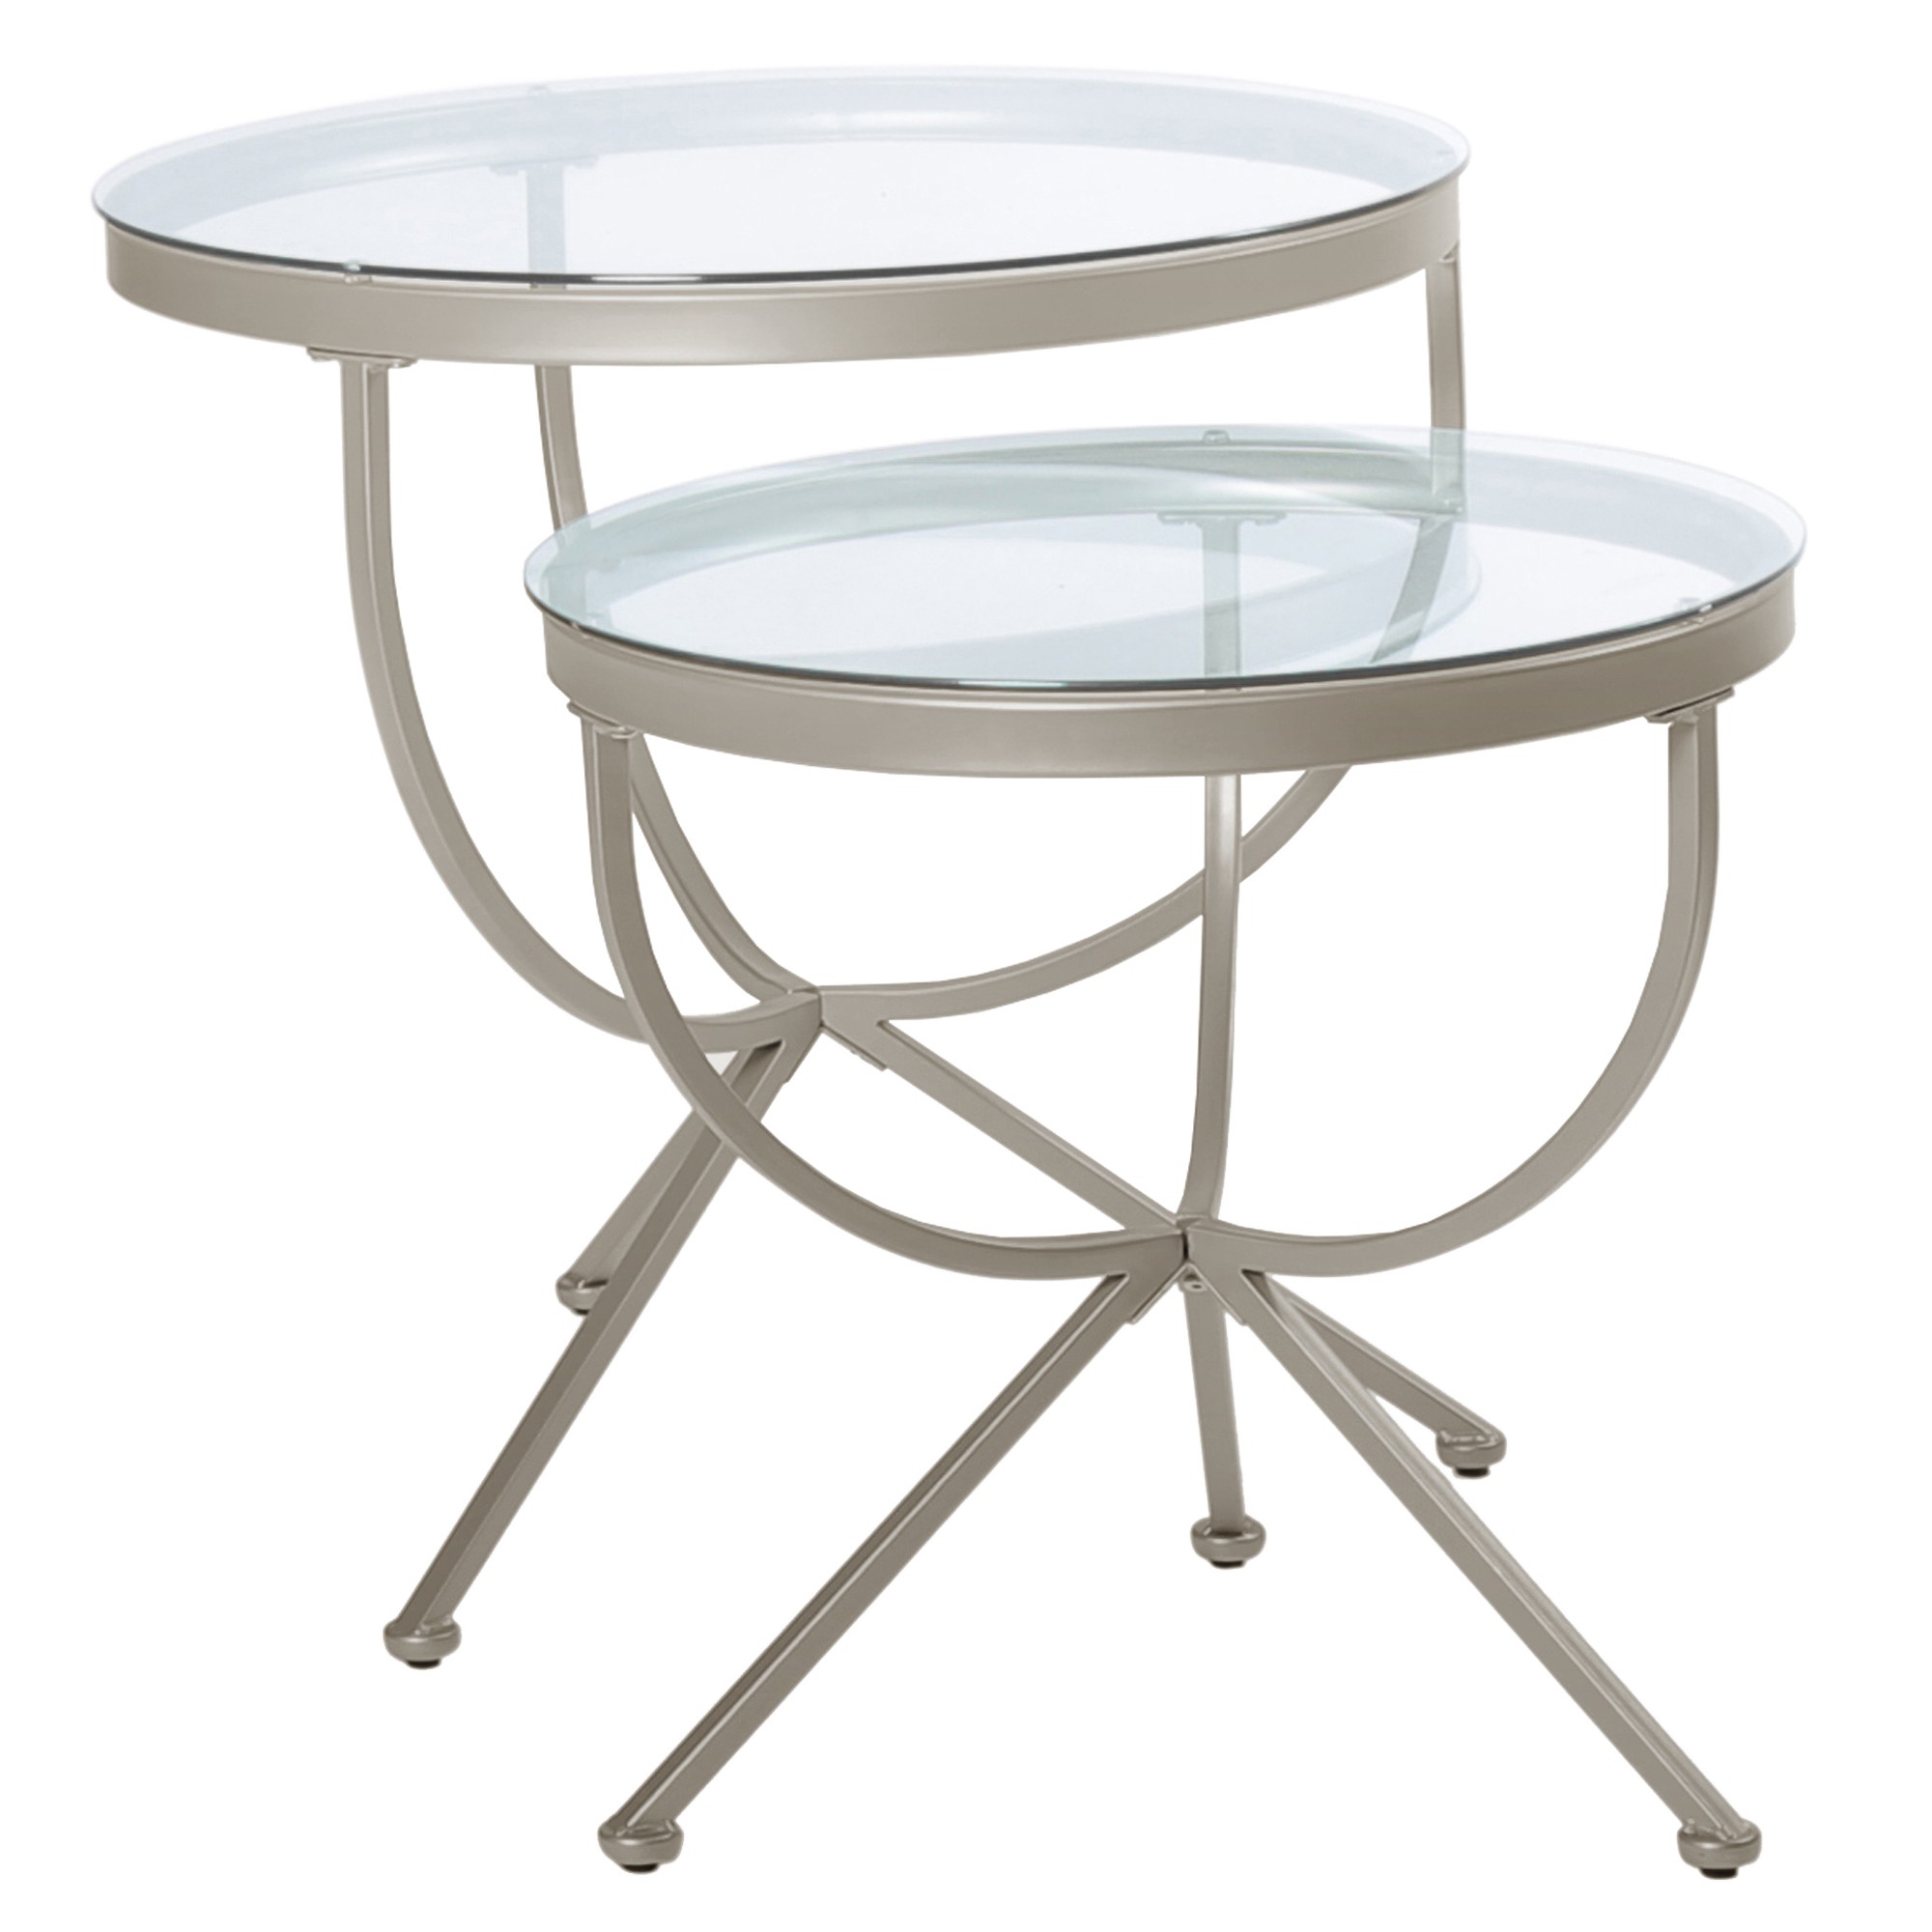 44" x 44" x 44.5" Clear Tempered Glass and Silver Metal Nesting Table Set - Set of 2